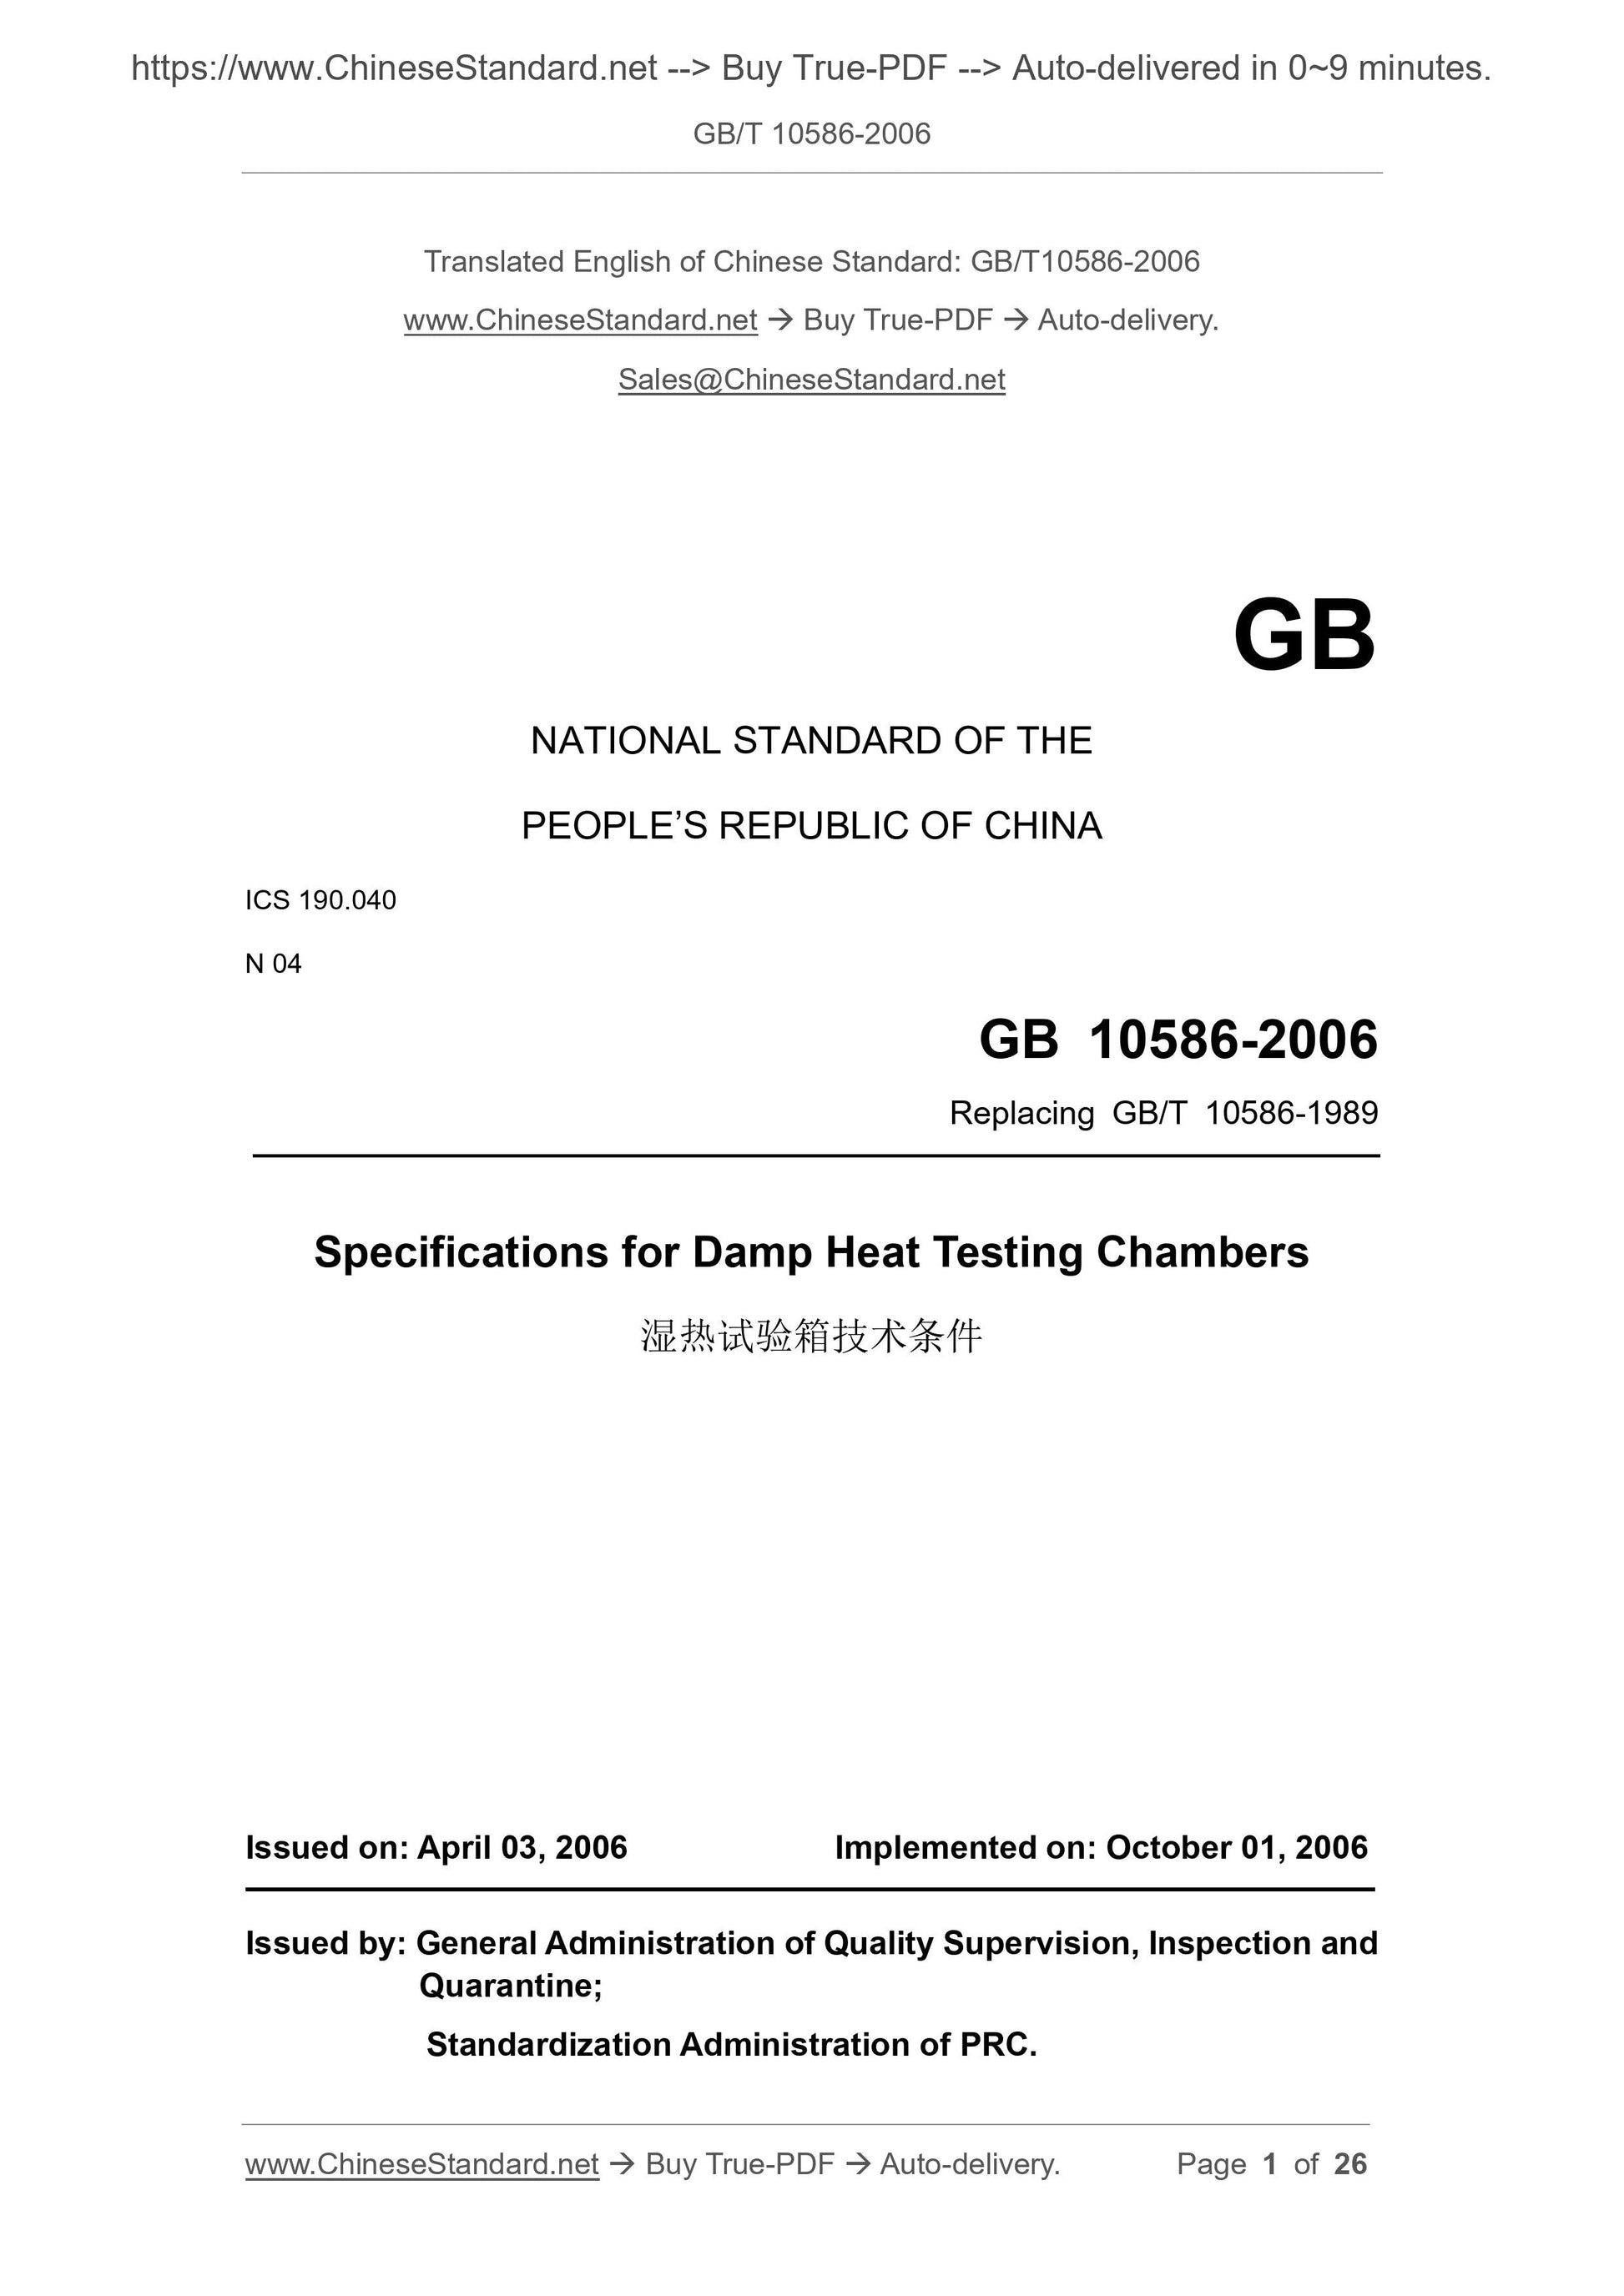 GB/T 10586-2006 Page 1